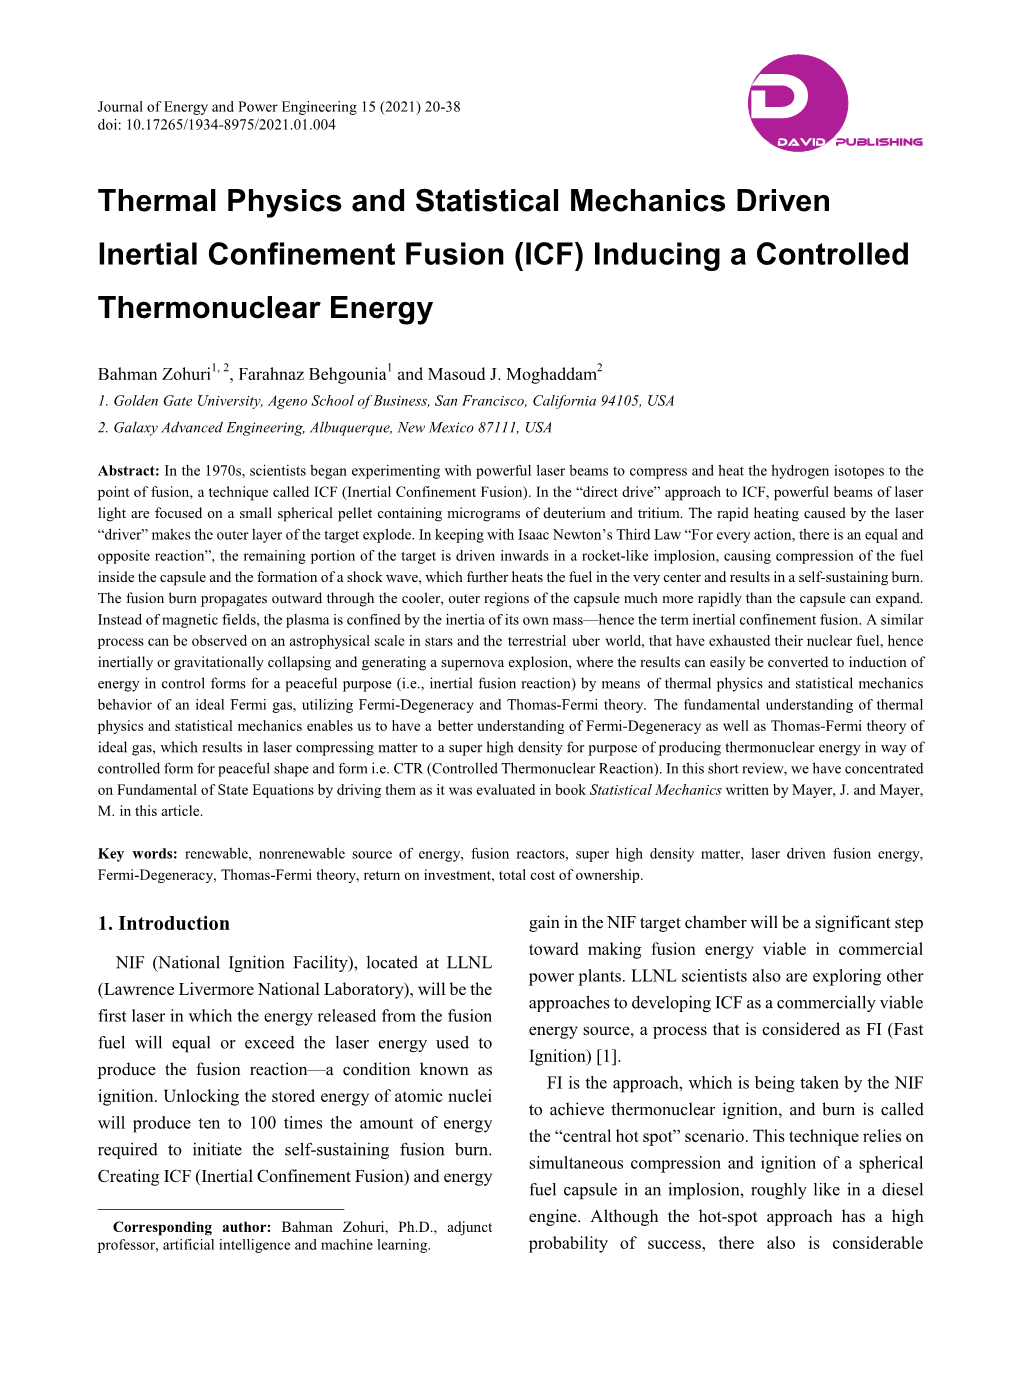 Thermal Physics and Statistical Mechanics Driven Inertial Confinement Fusion (ICF) Inducing a Controlled Thermonuclear Energy